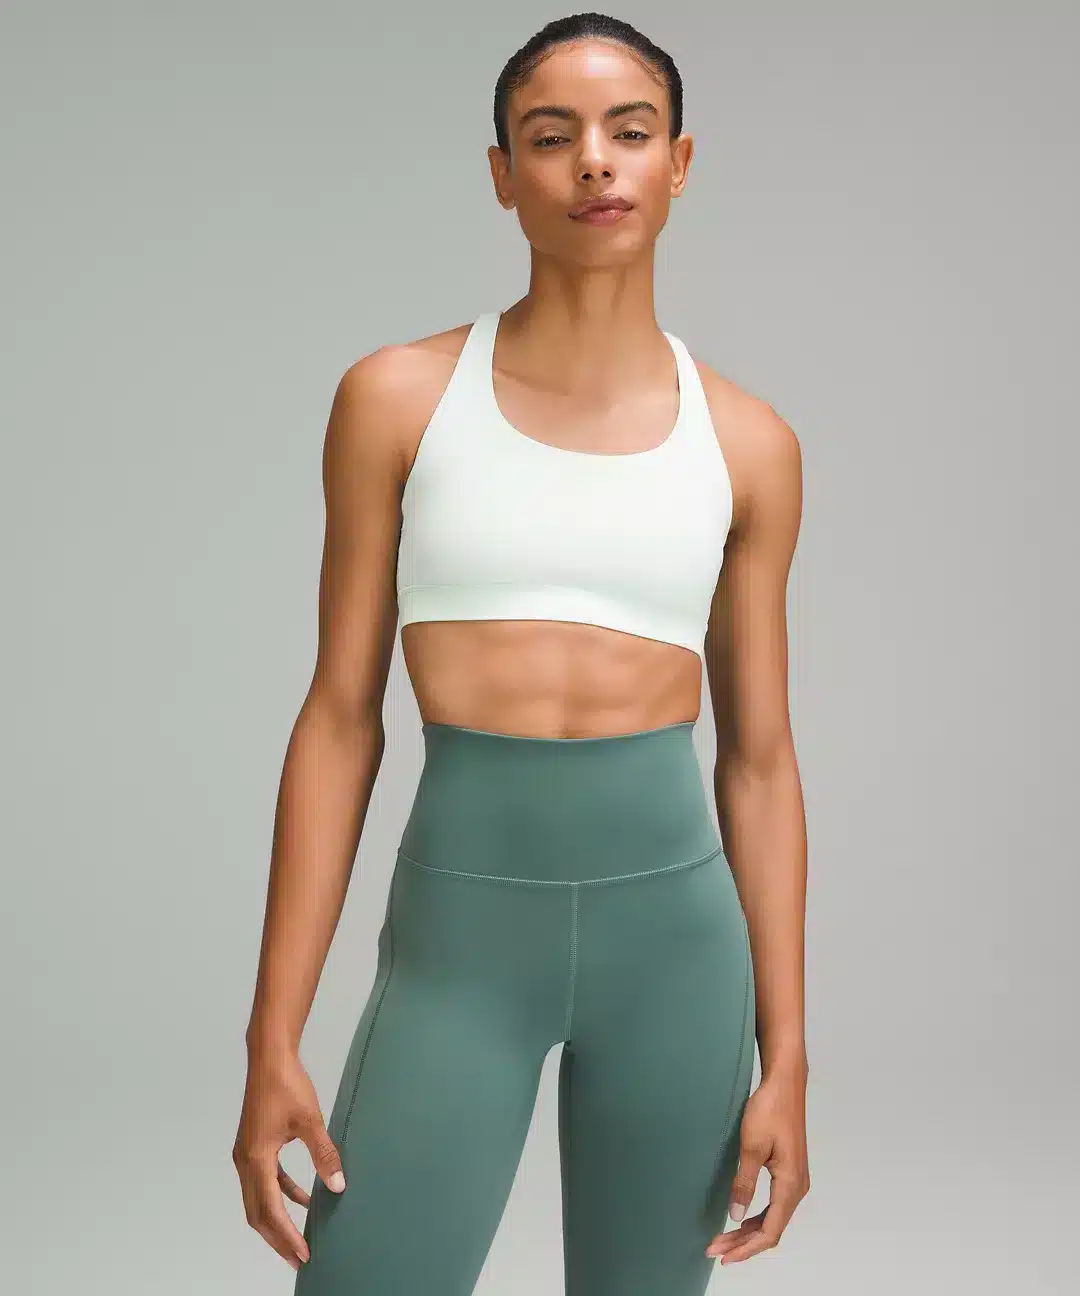 6 Best Early Lululemon Black Friday Deals for People Looking to Get Fitter